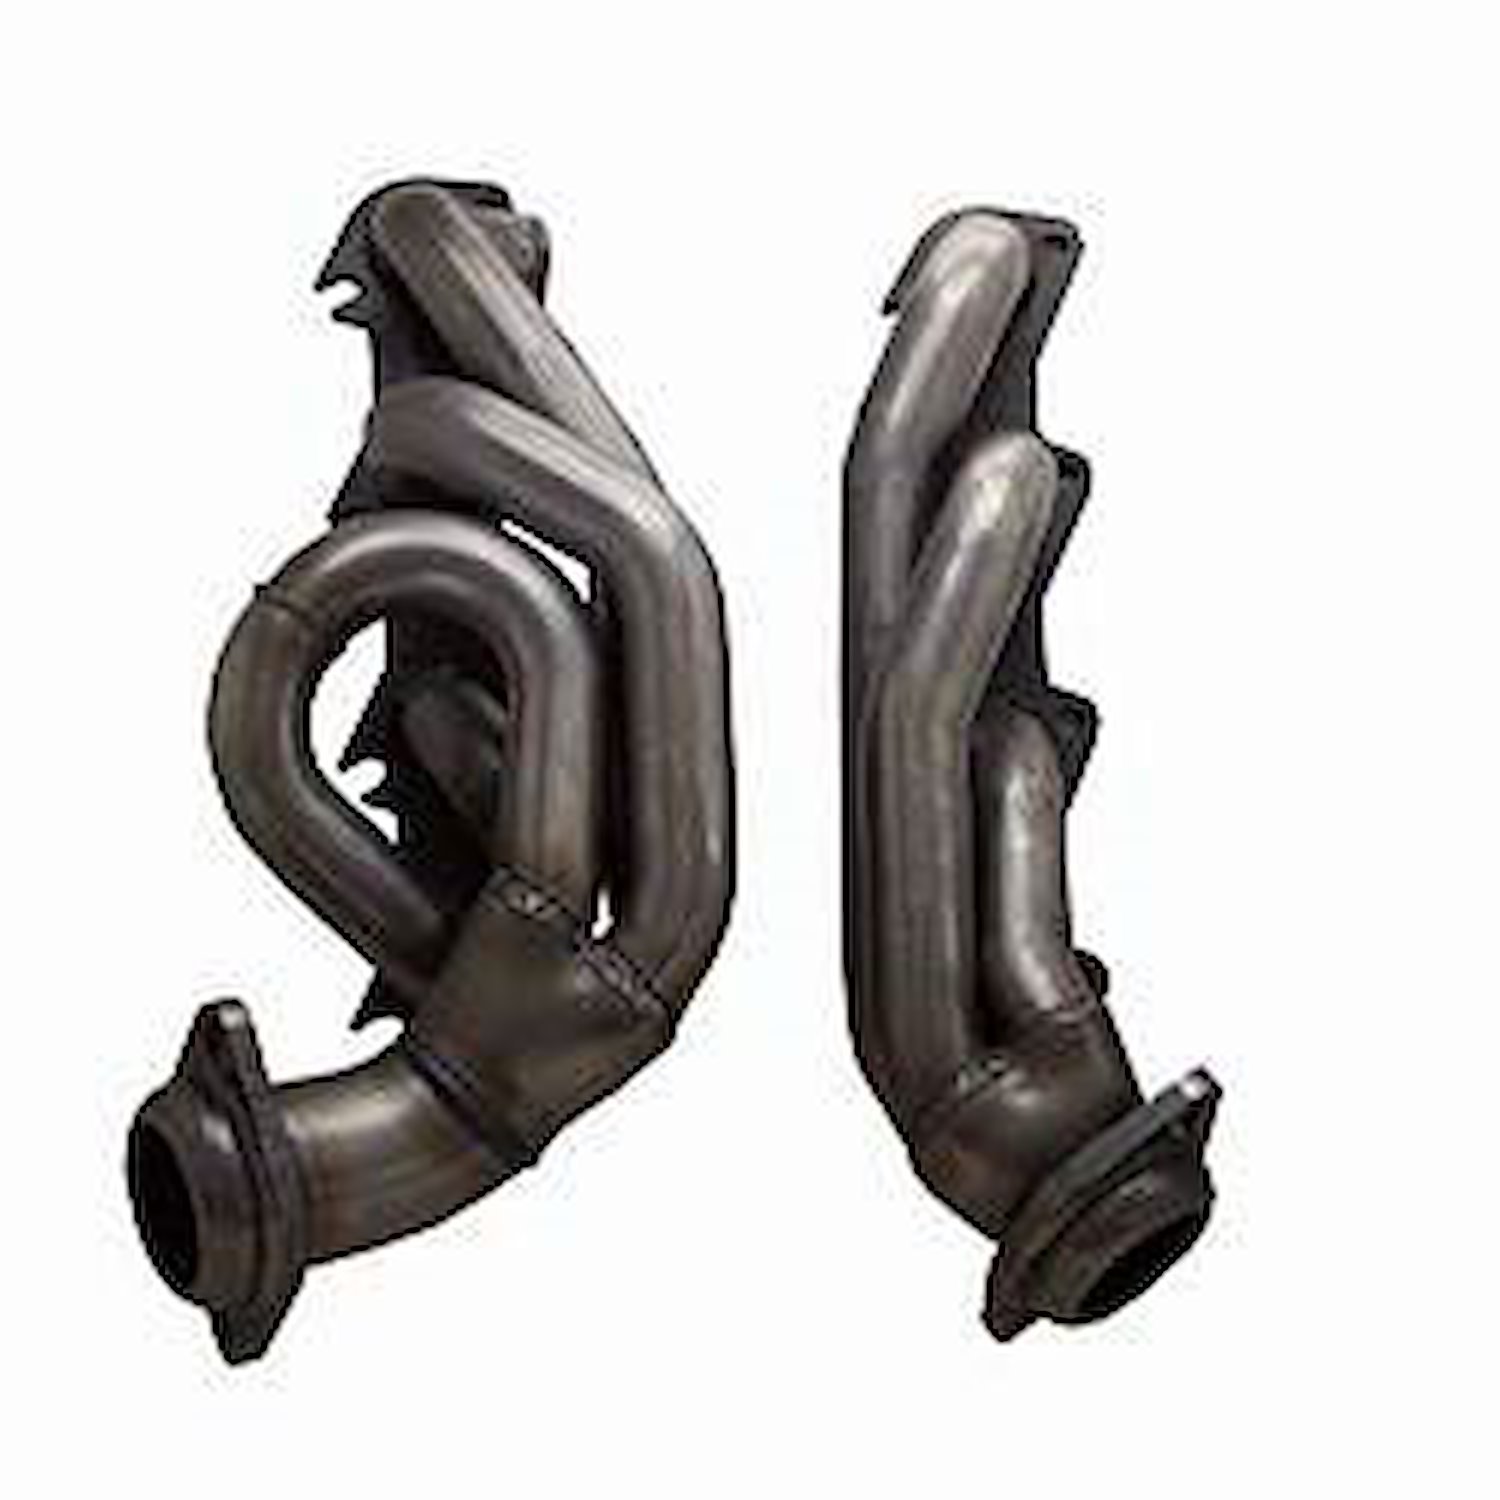 Ceramic Coated Stainless Steel Truck Headers 1999-2004 F-250/F-350 Super Duty